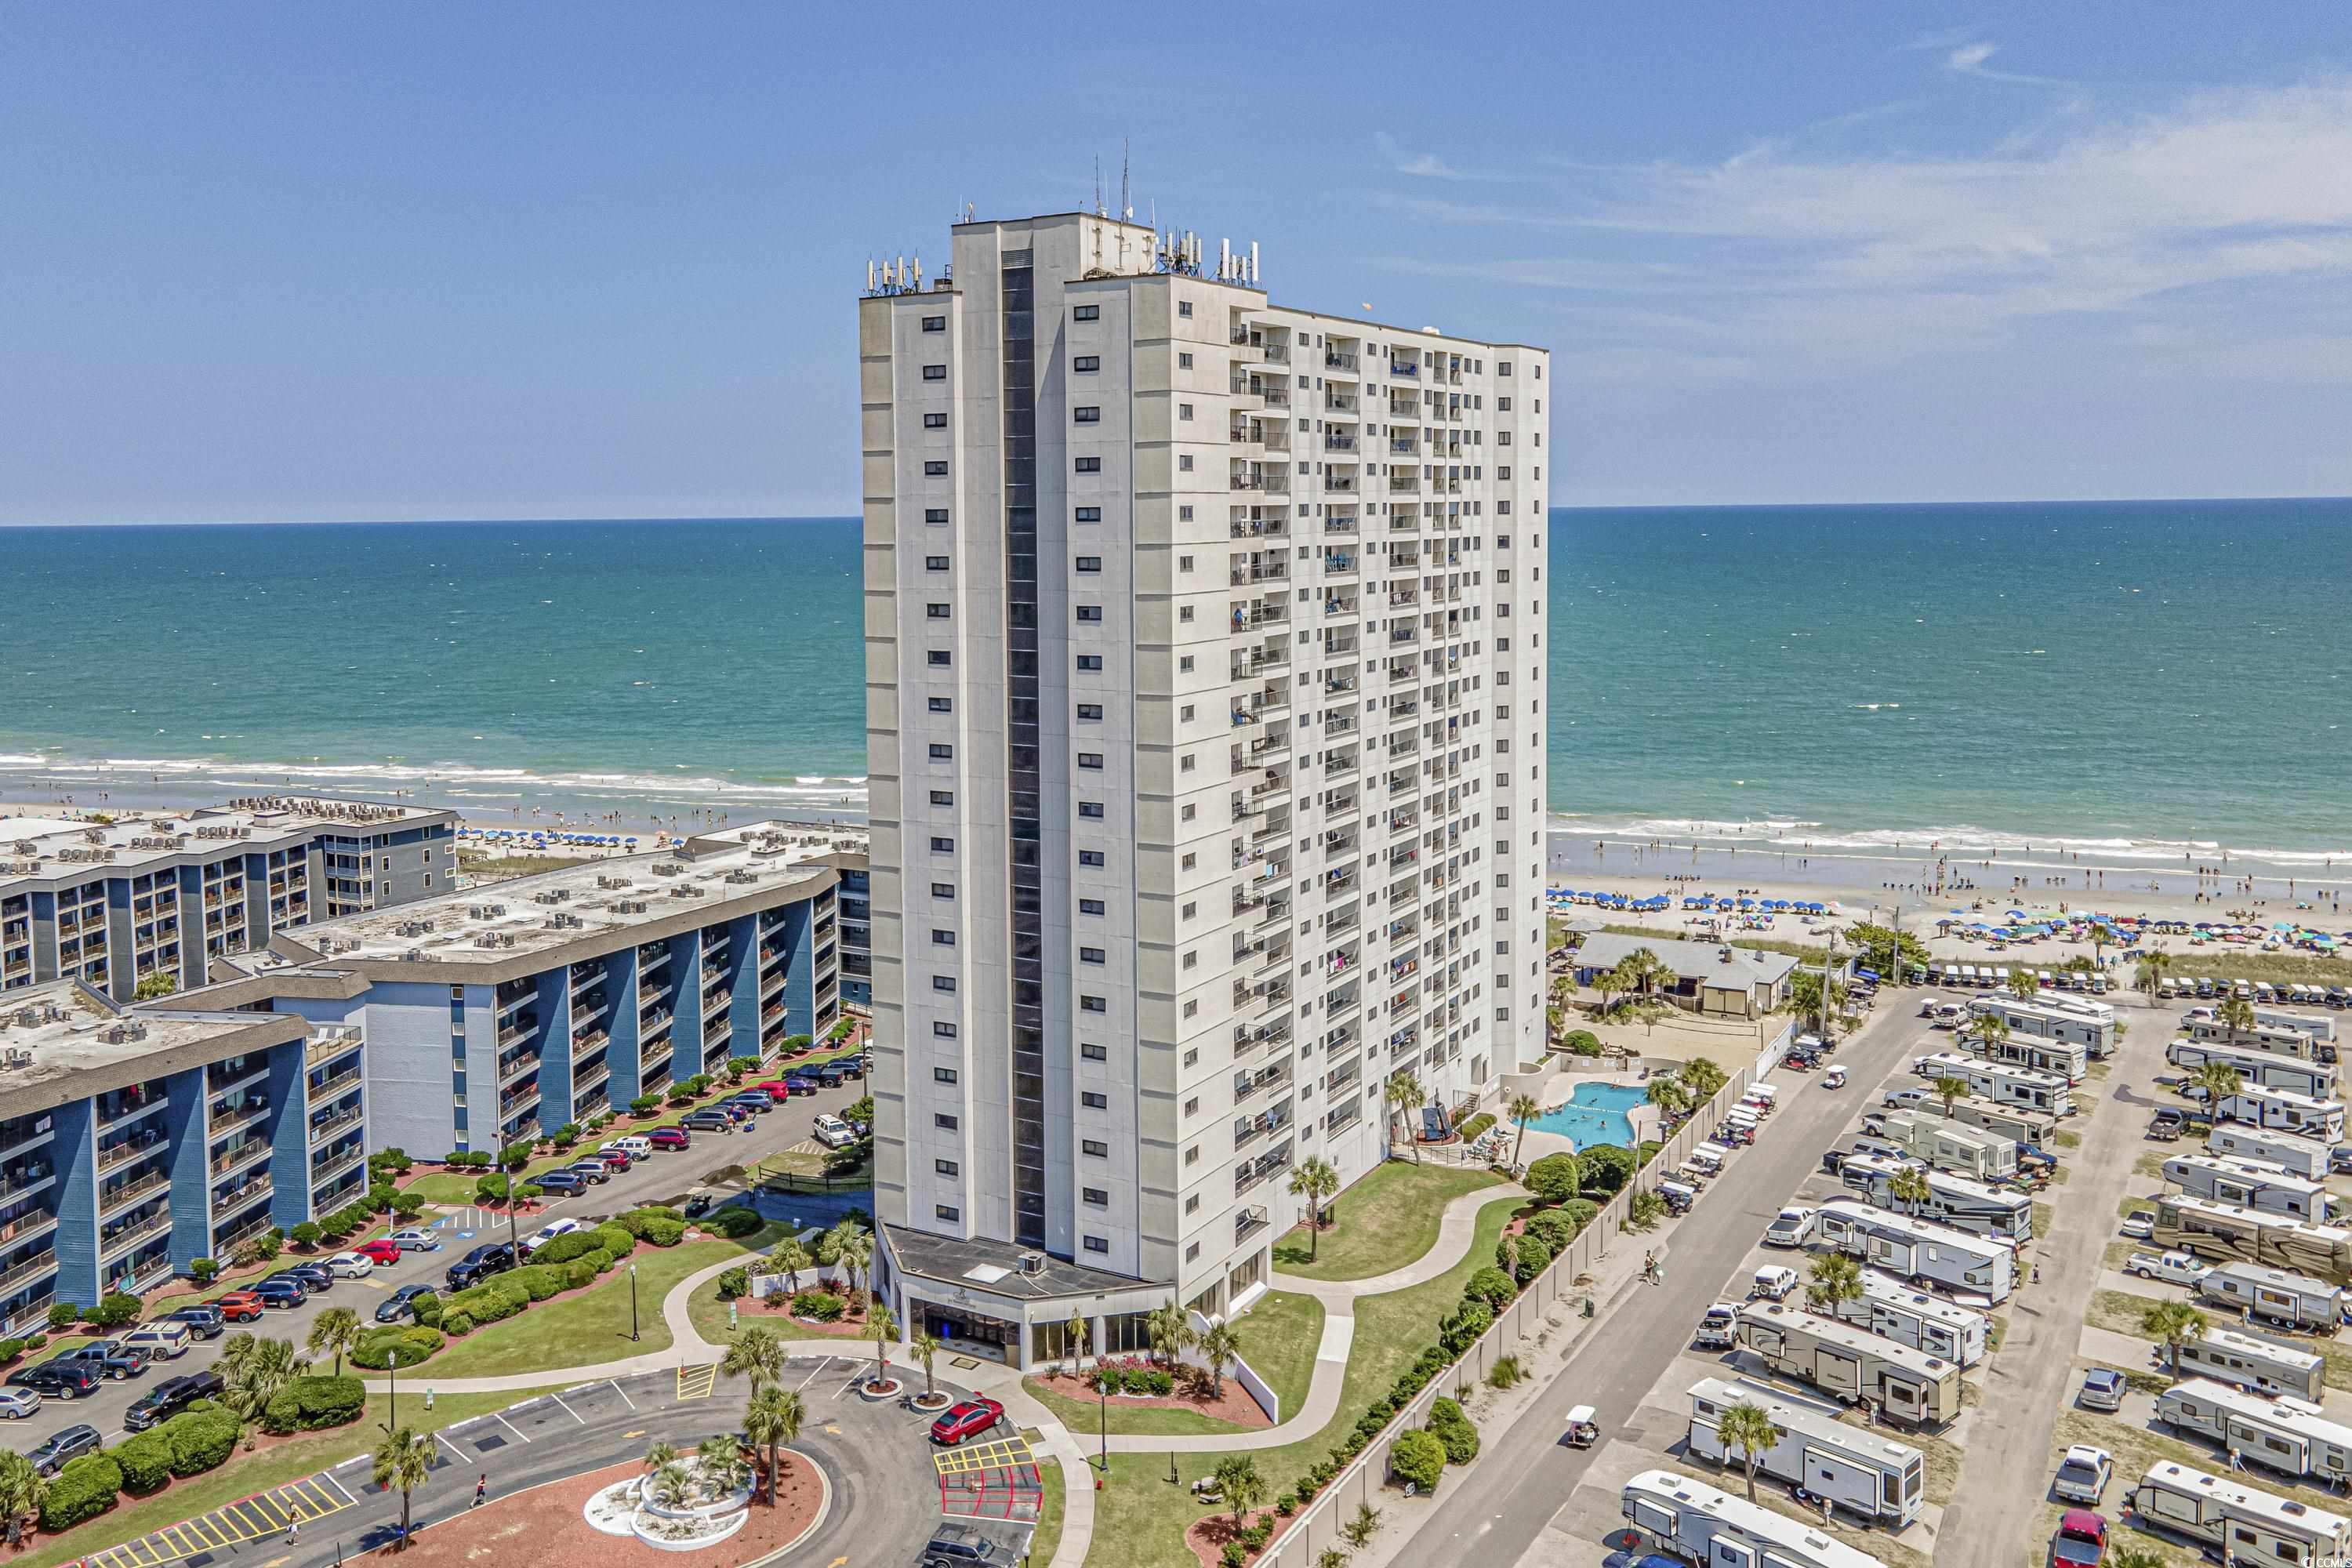 priced to move, this 2 bedroom, 2 bathroom unit on the 14th floor with  offers tremendous views of the south strand and the sunsets, features new lvp floors  and tiles in the bathrooms. with a combined living room/dining area/ kitchen it gives an open concept. the unit features a large side balcony. unit being sold with furnishings. myrtle beach resort is a gated community on over 33 acres and offers multiple swimming pools--including indoor pools, a lazy river, hot tubs, saunas, tennis courts, fitness room, game room and playgrounds and restaurant.  the prime location of the oceanfront building puts you steps from the beach. all information deemed reliable, buyer is responsible for verification